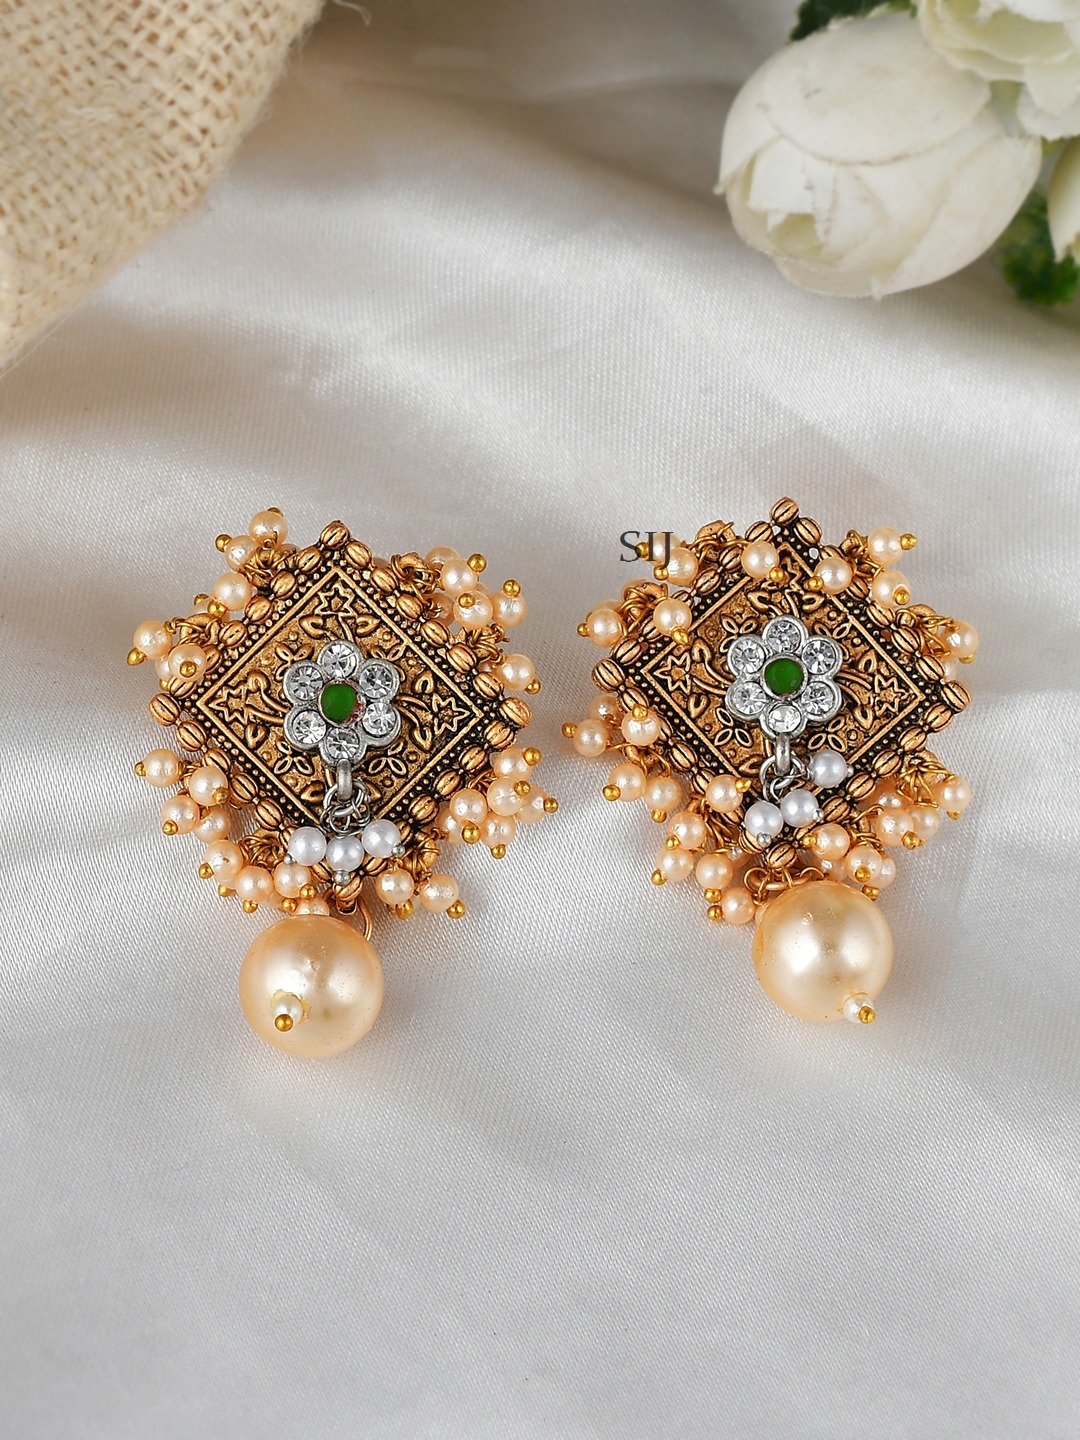 Antique Gold Plated Stones studs Earrings